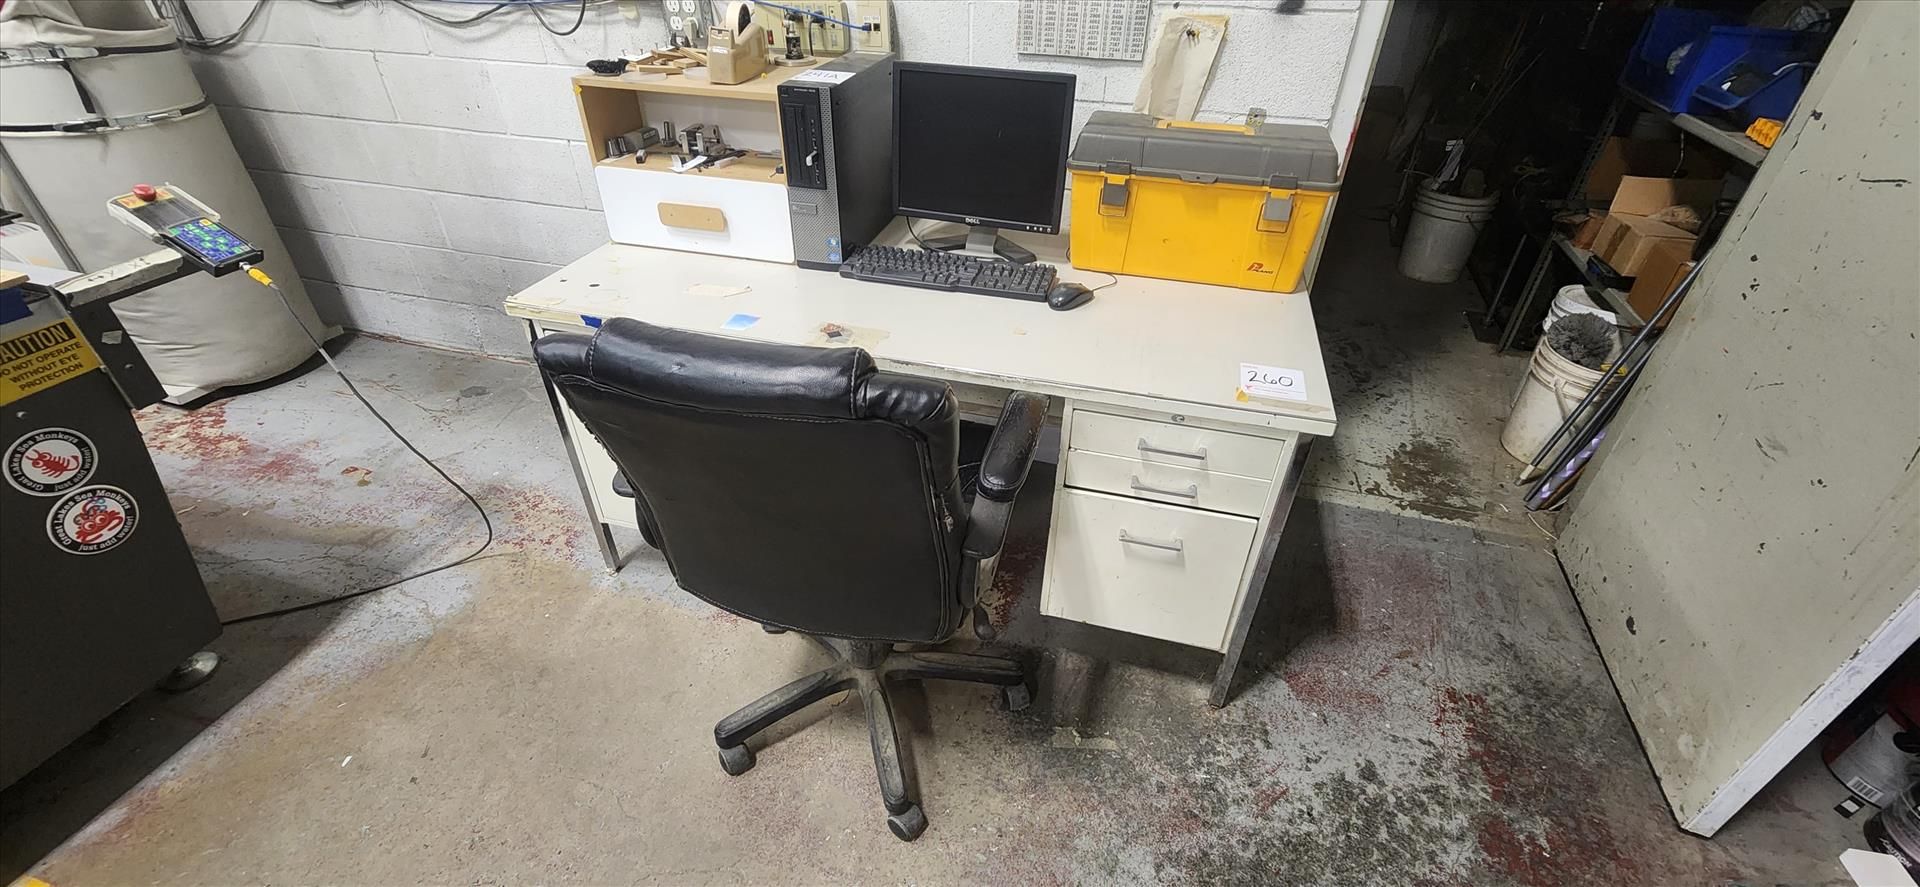 desk and chair (excludes office machines, technology and papers)